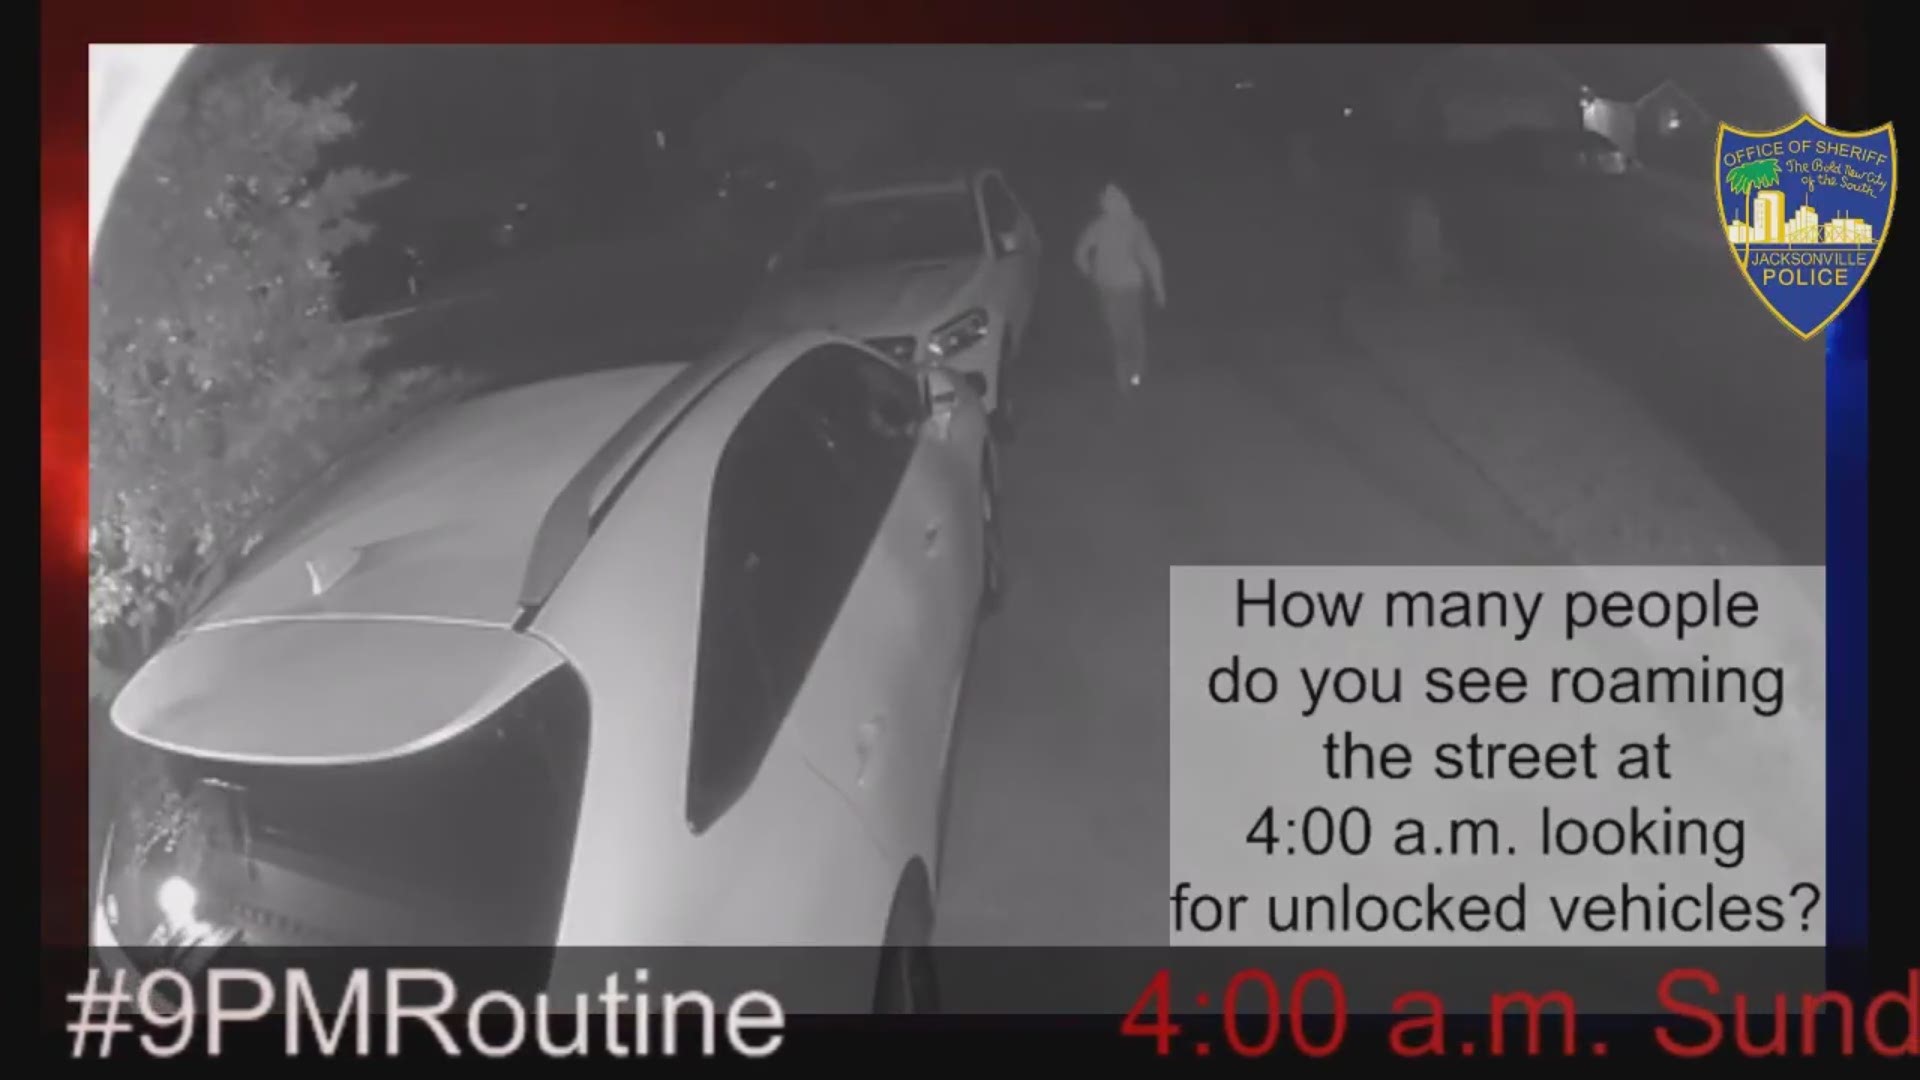 The Jacksonville Sheriff's Office says a video posted Monday evening showing a group of alleged "car surfers" in the Fort Caroline area should be enough to convince citizens to practice the 9 p.m. routine.